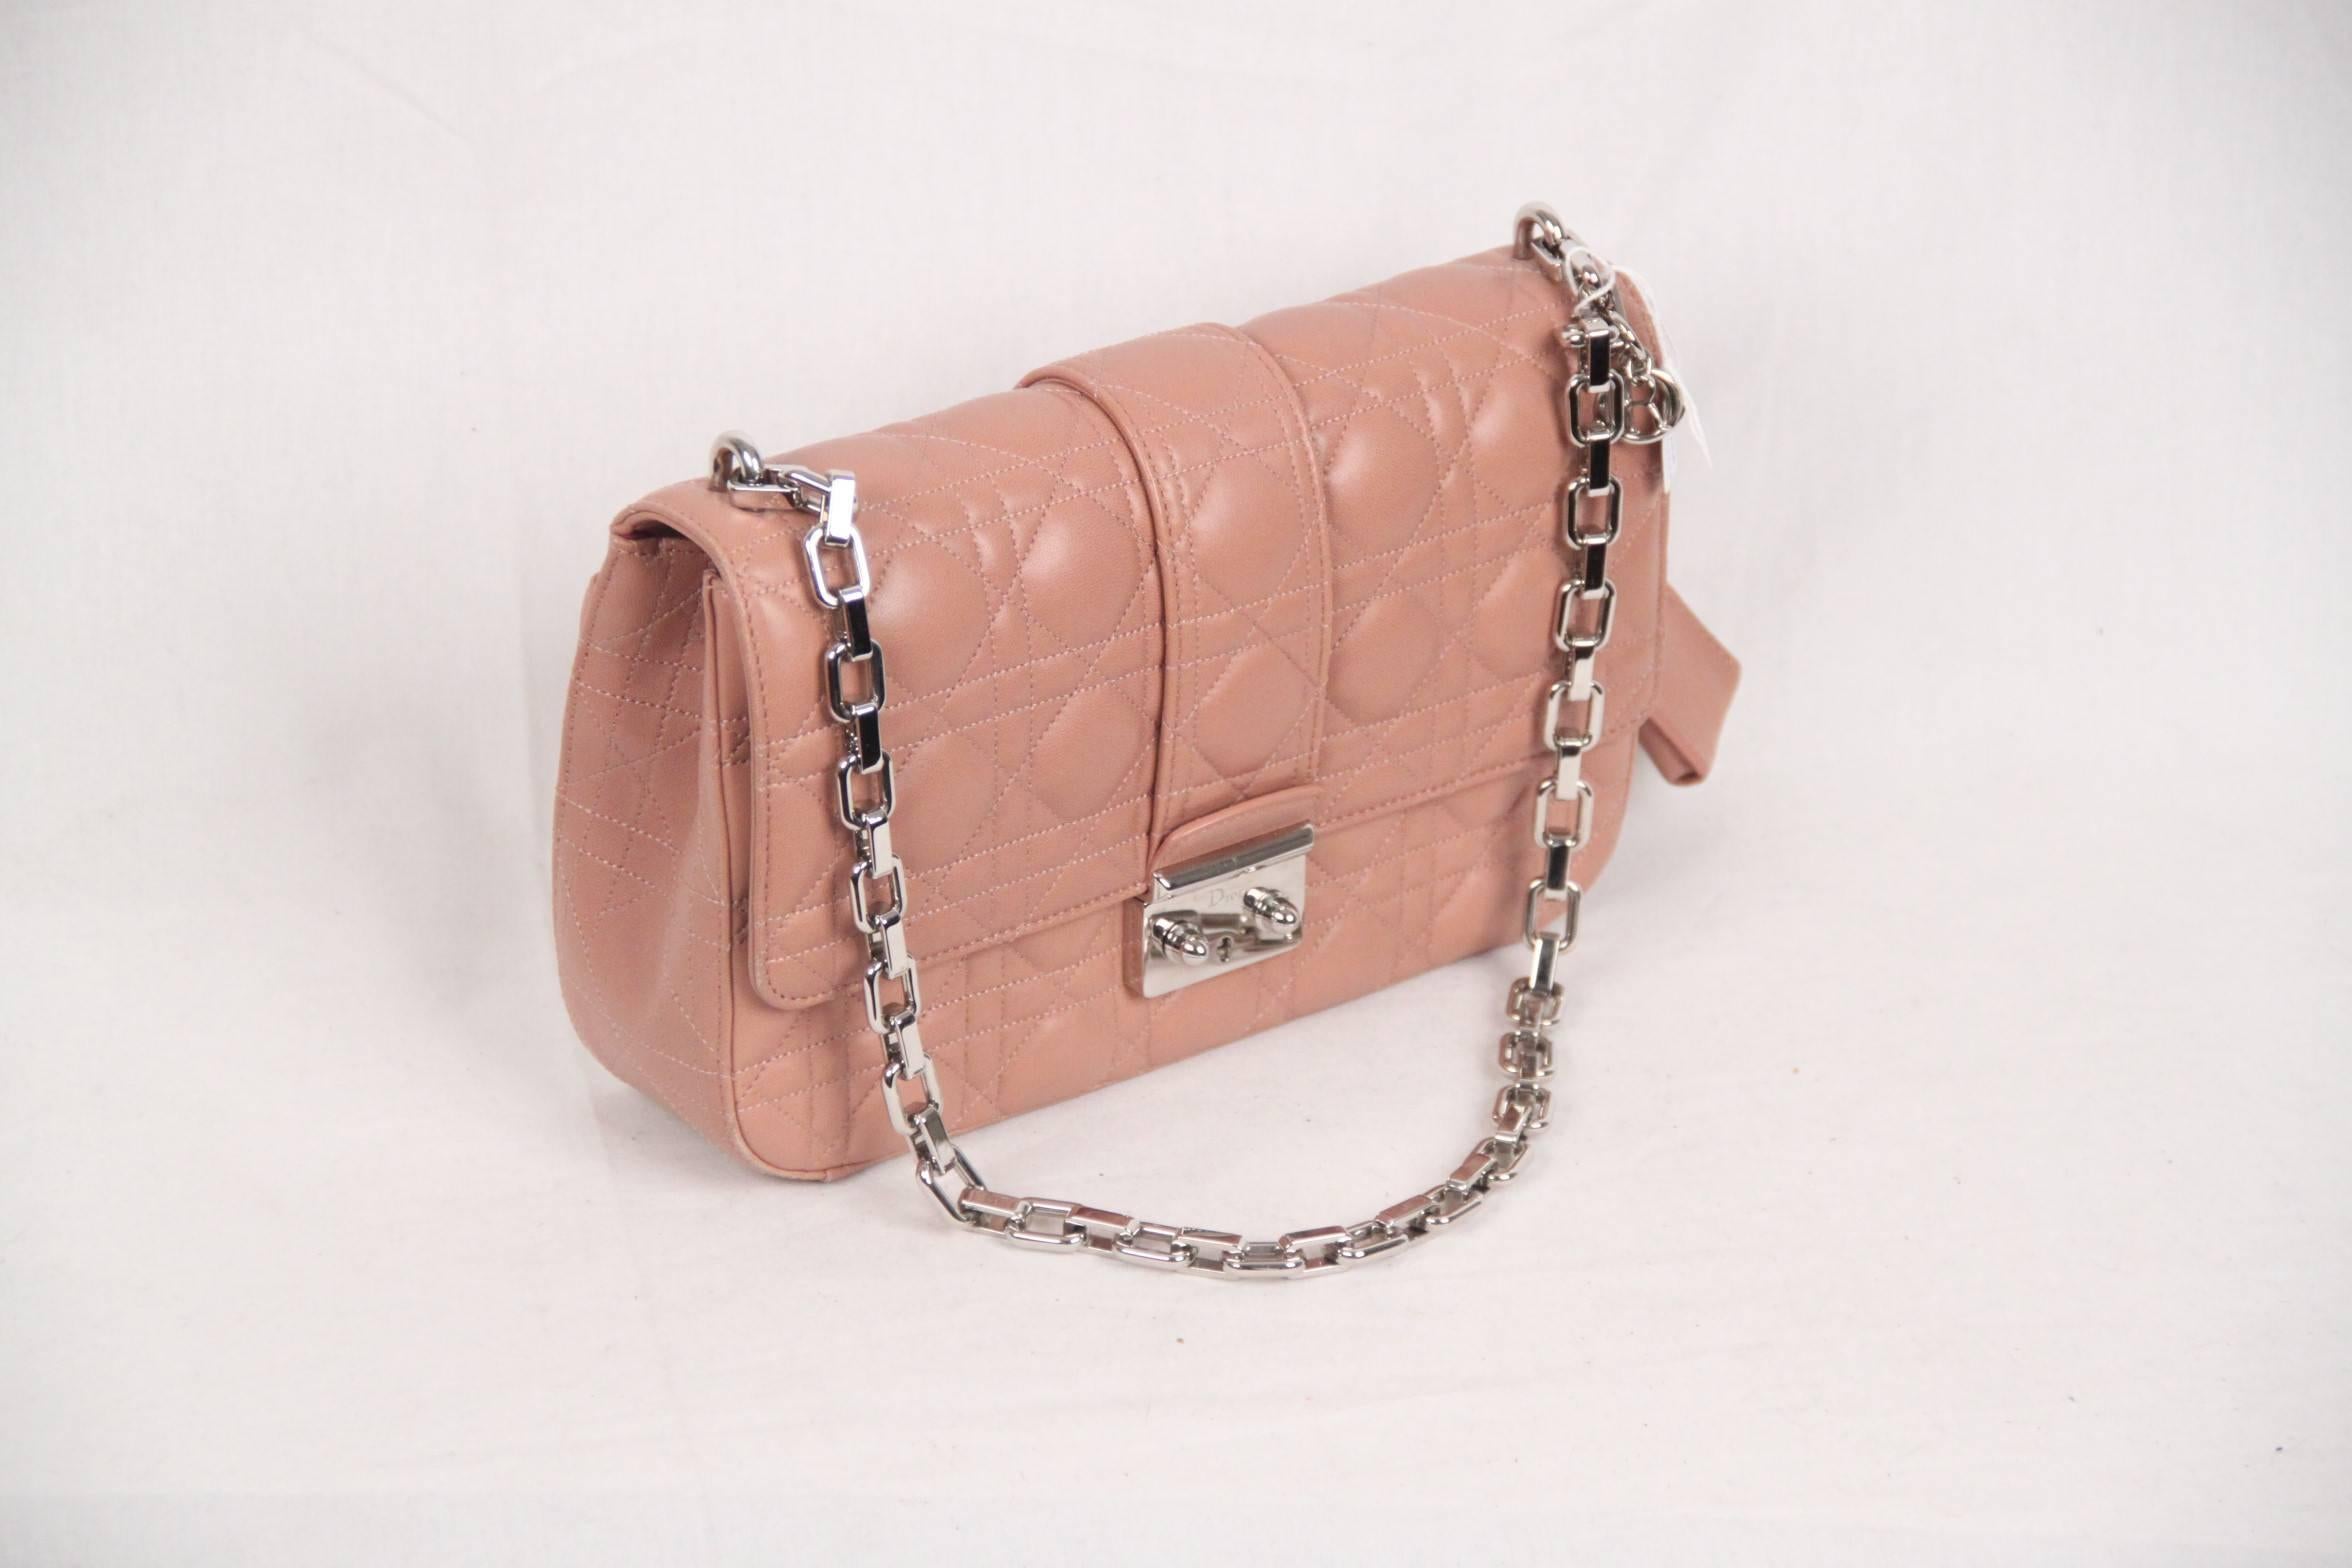 Beautiful MISS DIOR bag in baby pink color. Like the Lady Dior, Miss Dior is enhanced by iconic Dior 'Cannage' stitching. The iconic 'cannage' pattern by CHRISTIAN DIOR is inspired by the Napoleon III chairs used by Mr. Dior in his first ever